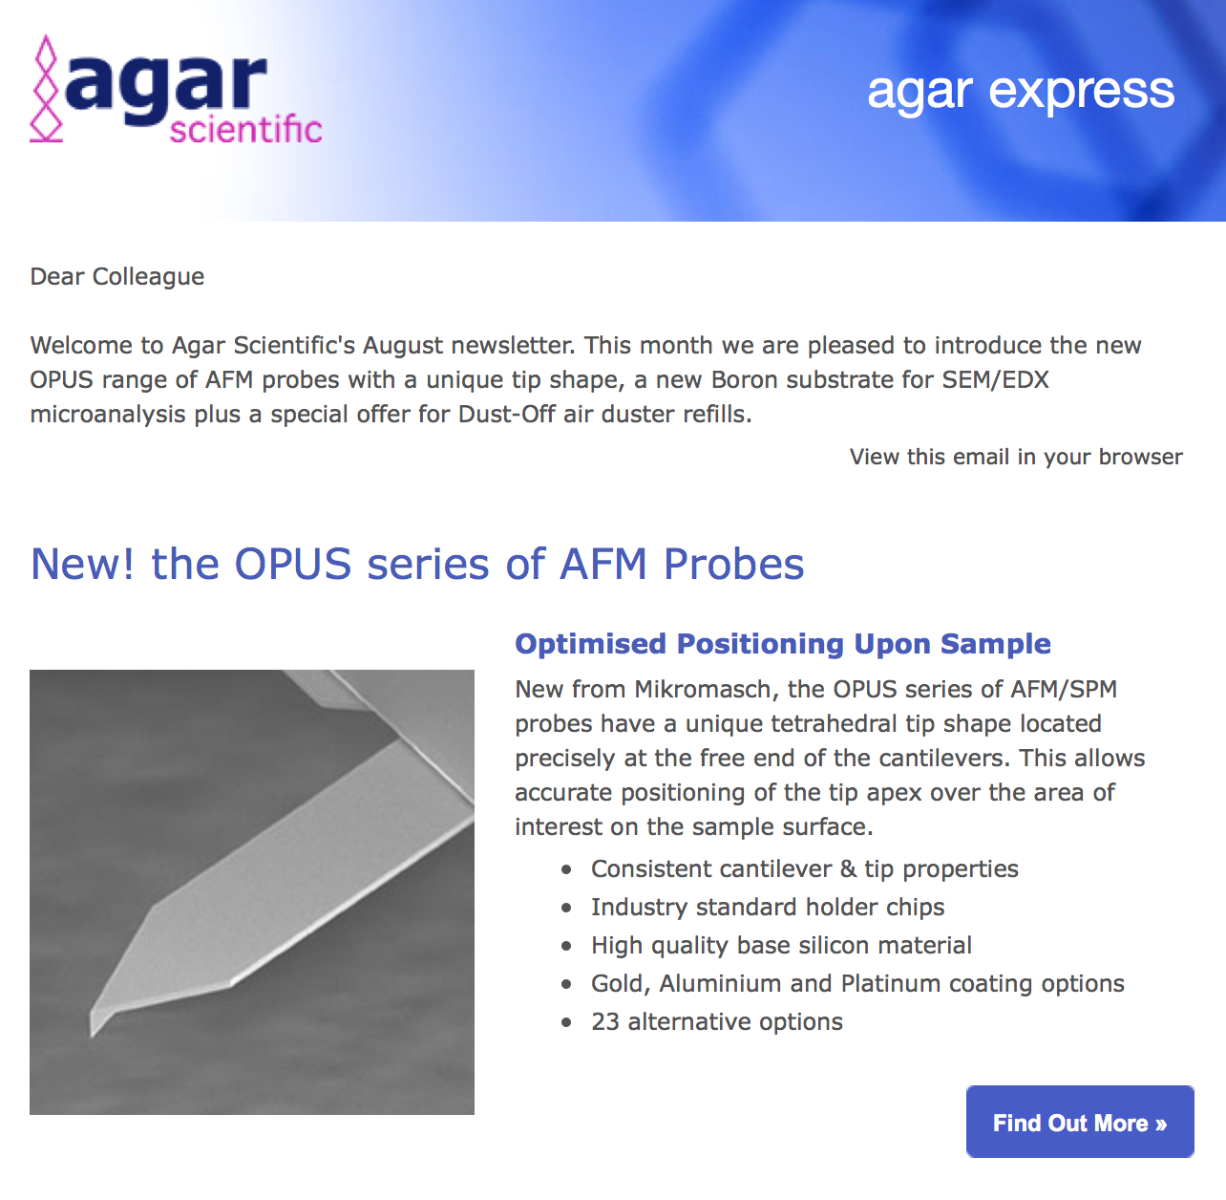 Agar Express August 2018 - new AFM probes with a unique tip shape, Boron substrate for SEM/EDX & more...